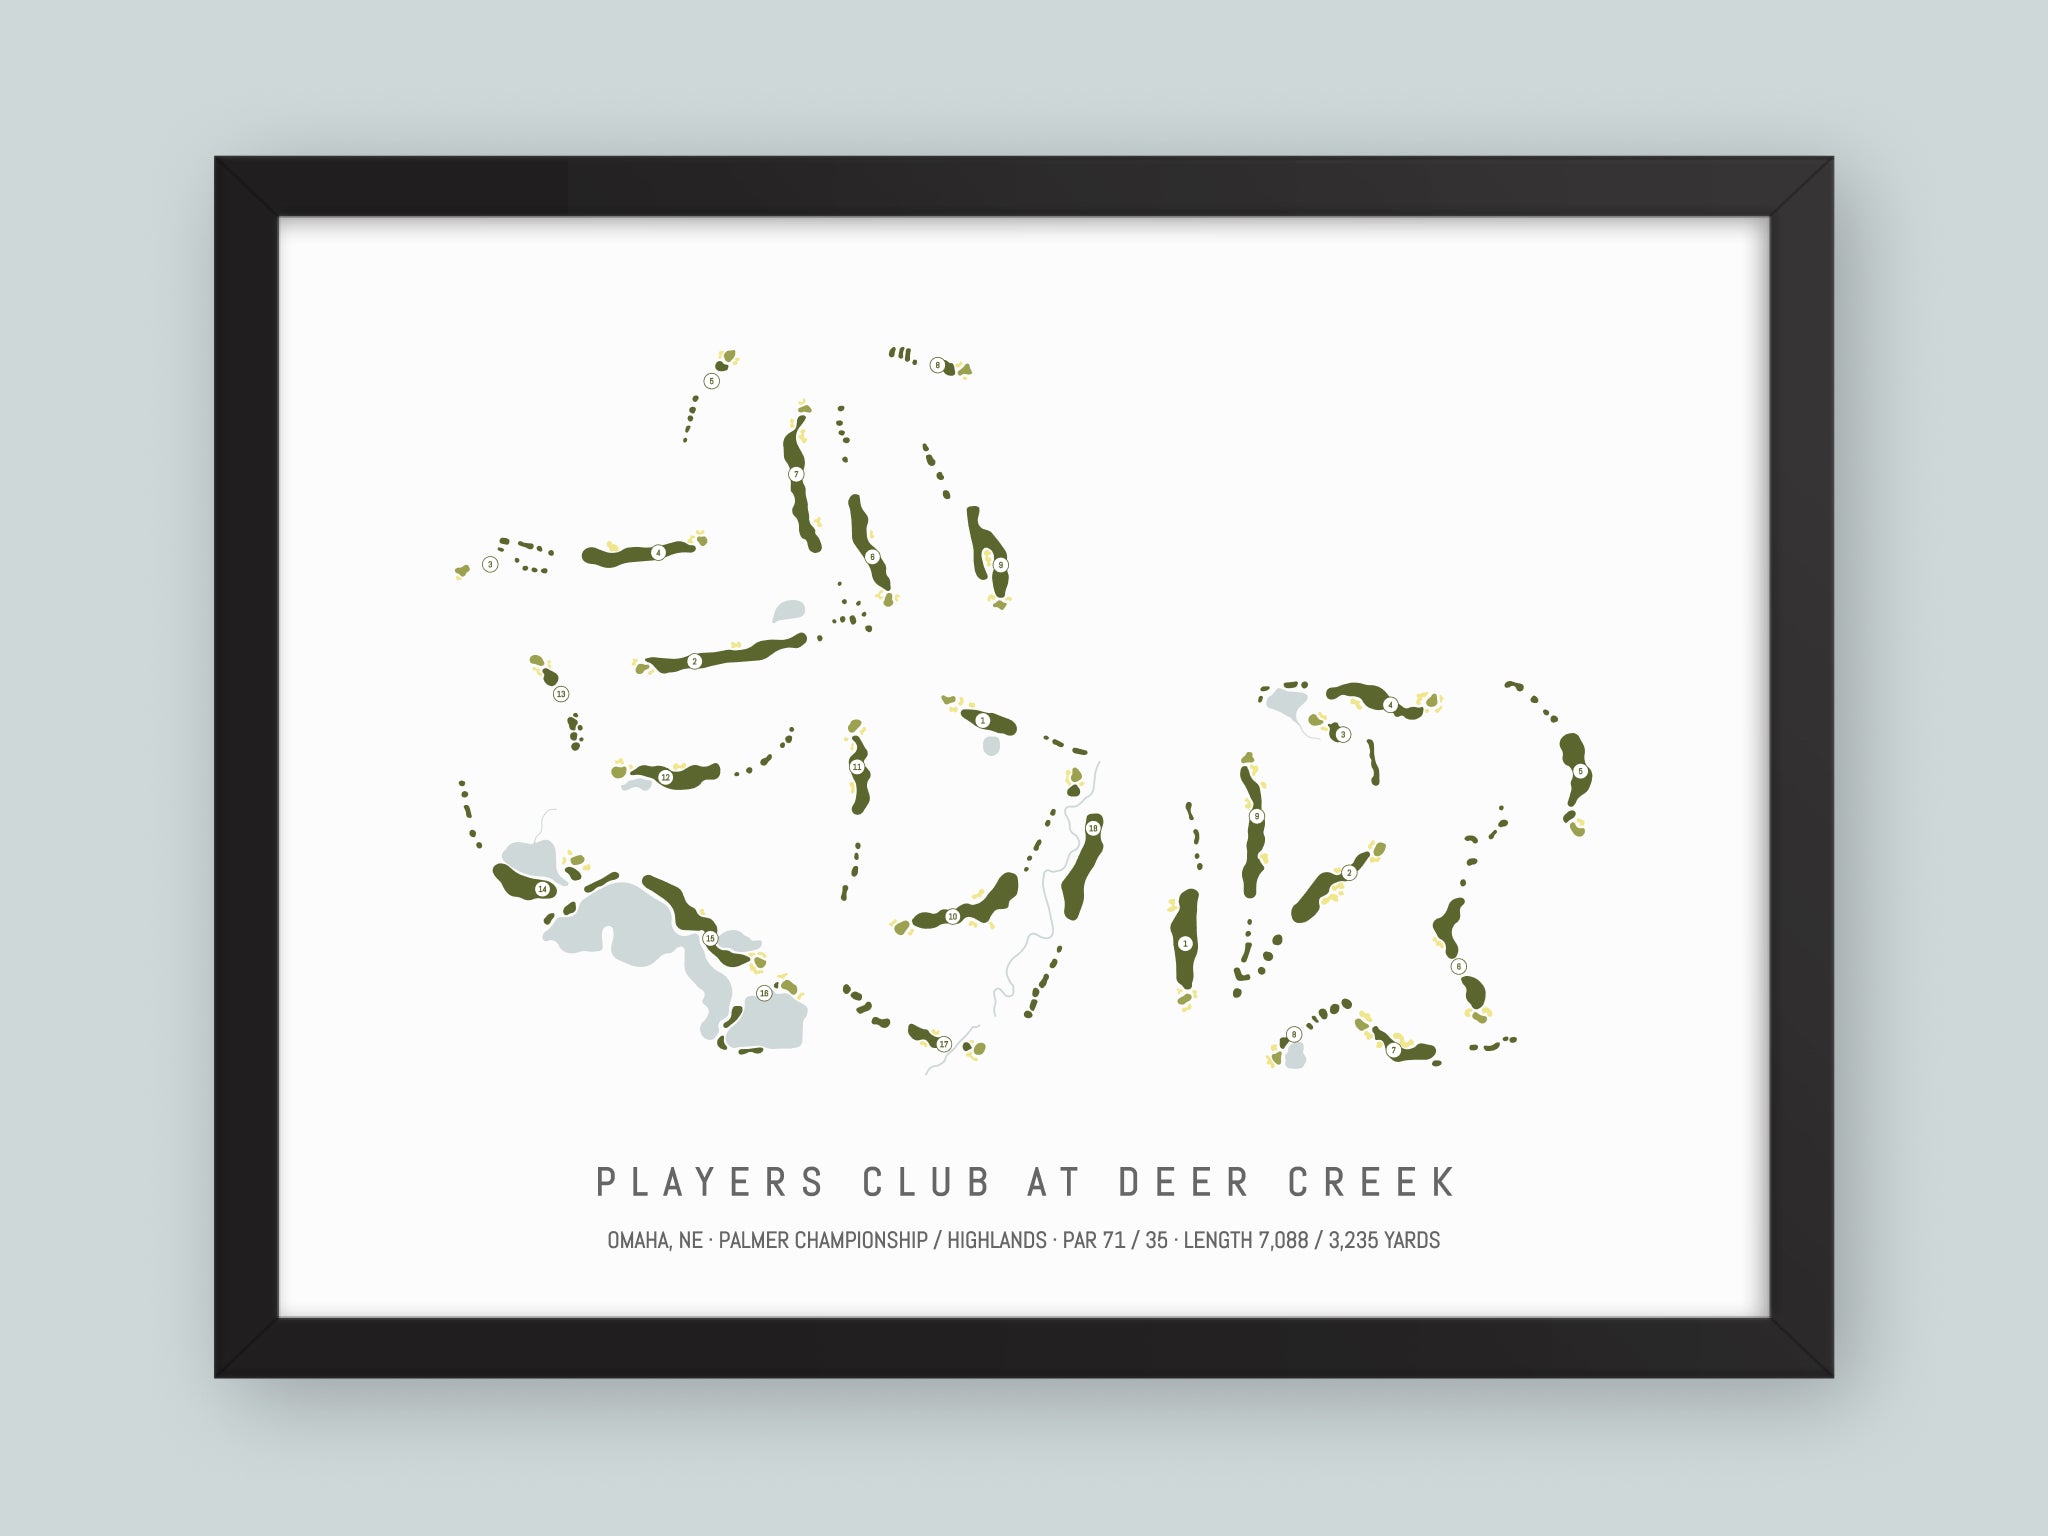 Players-Club-At-Deer-Creek-NE--Black-Frame-24x18-With-Hole-Numbers